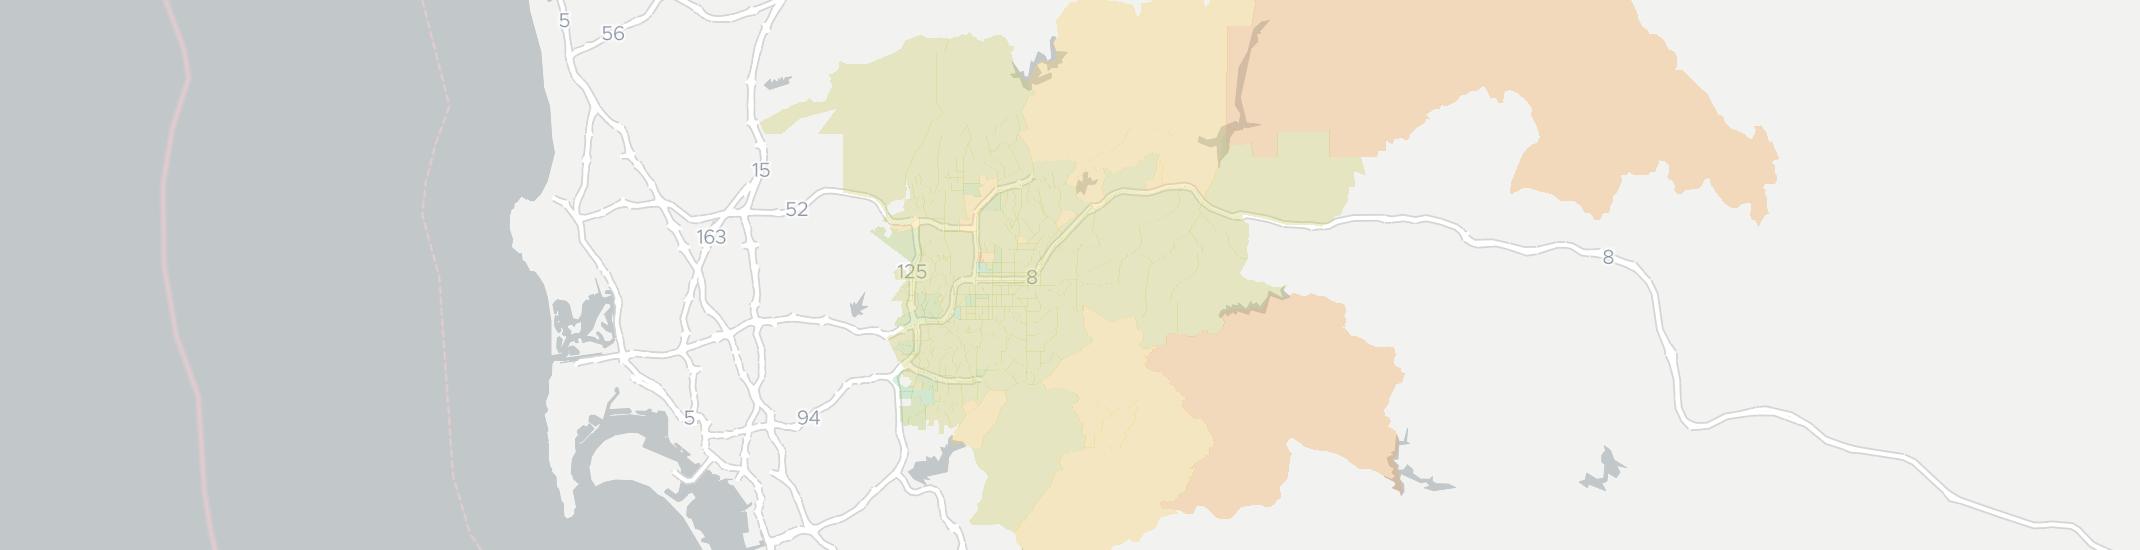 El Cajon Internet Competition Map. Click for interactive map